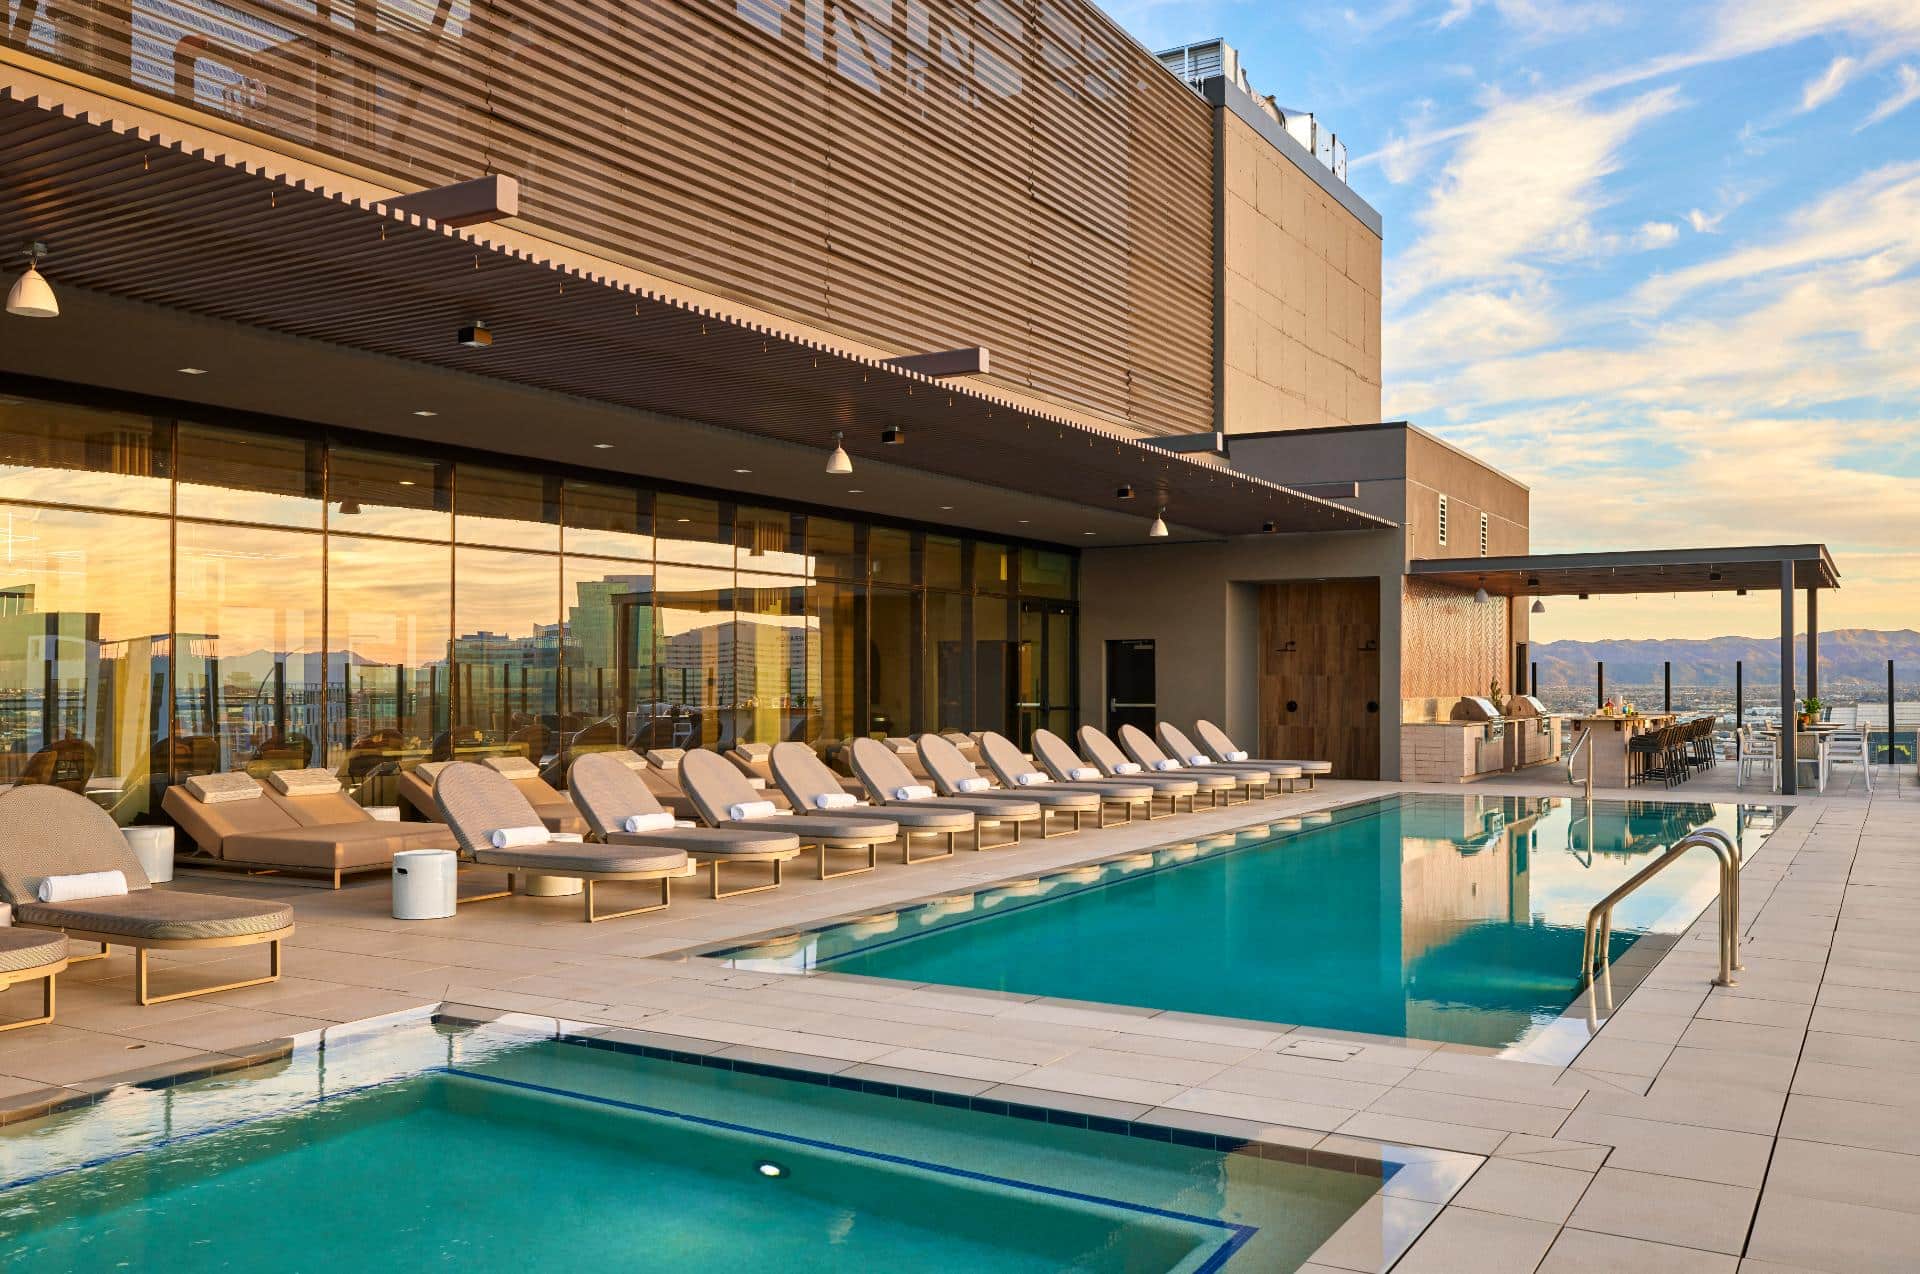 Pool at Skye on 6th Apartments in the Metro Phoenix Area